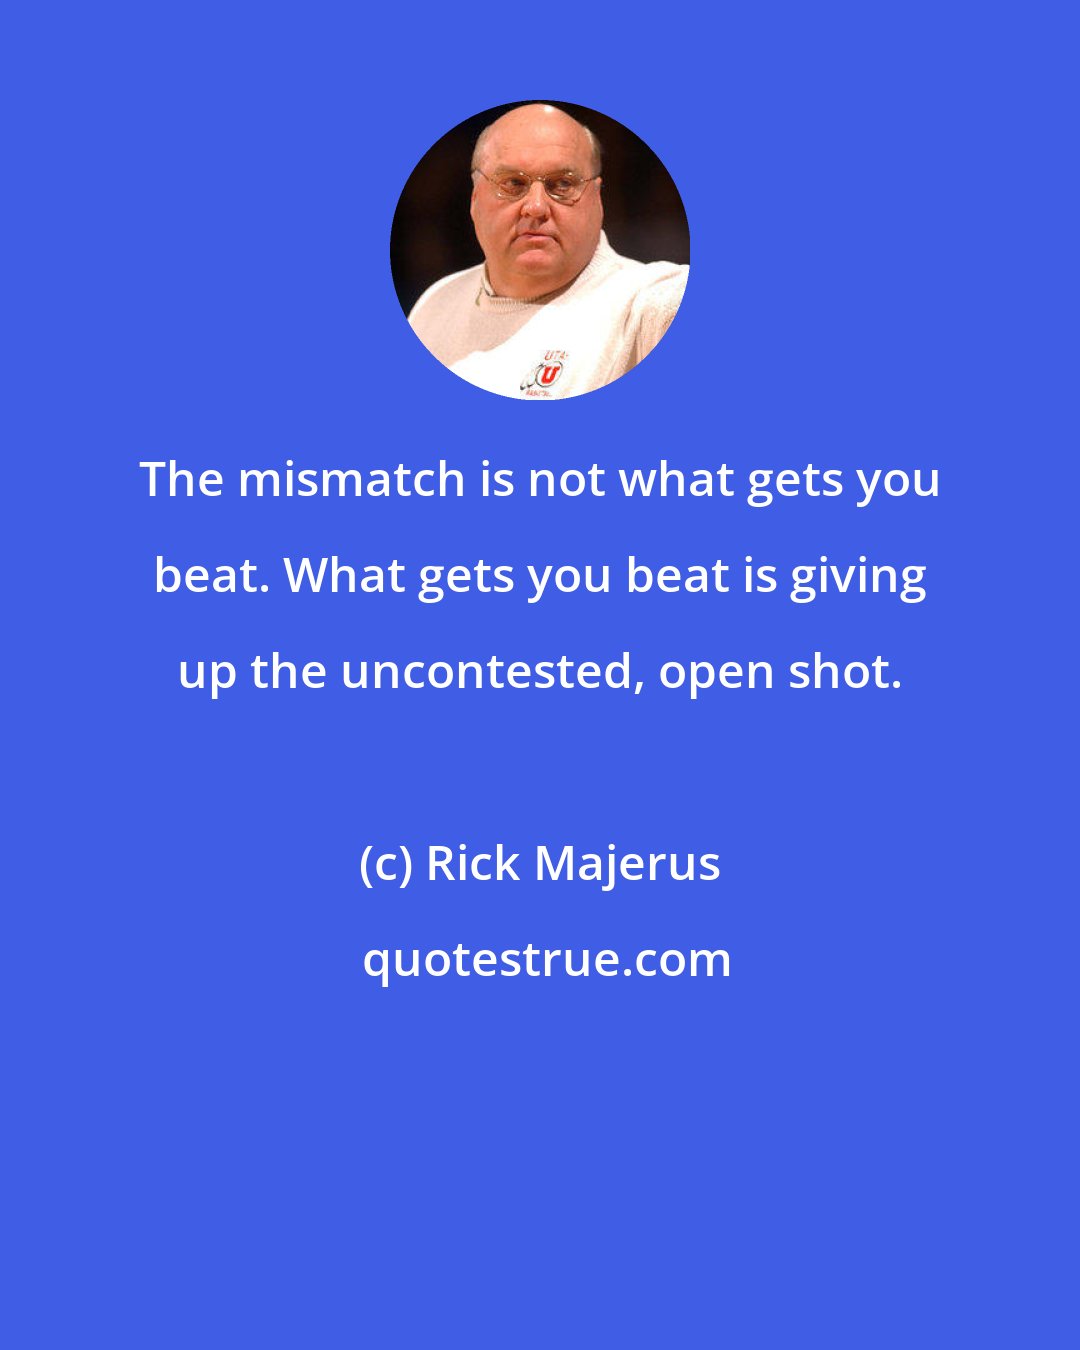 Rick Majerus: The mismatch is not what gets you beat. What gets you beat is giving up the uncontested, open shot.